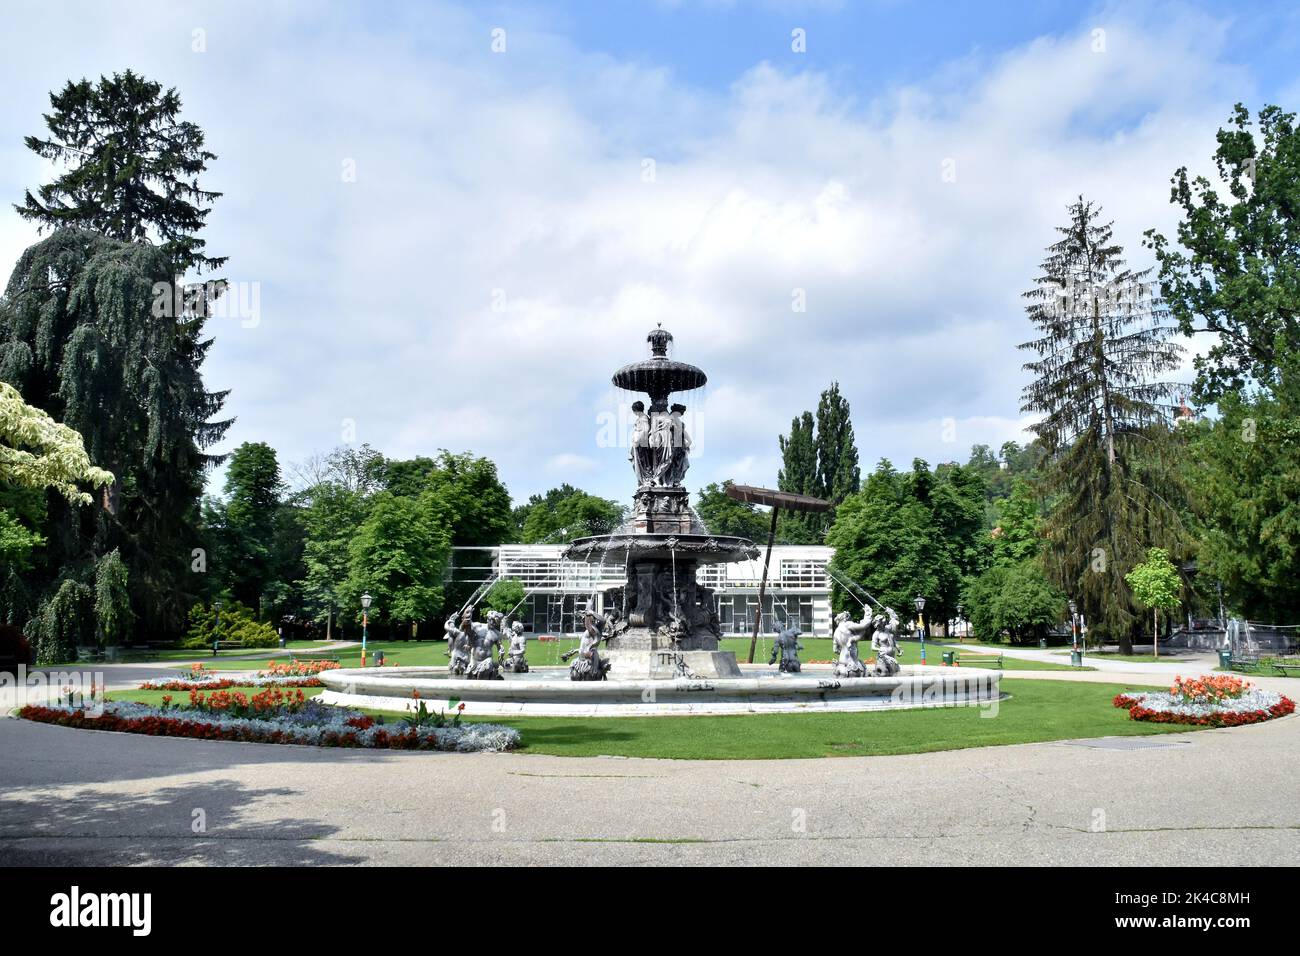 The view of vintage fountains and trees in Stadtpark Graz under the blue cloudy sky Stock Photo